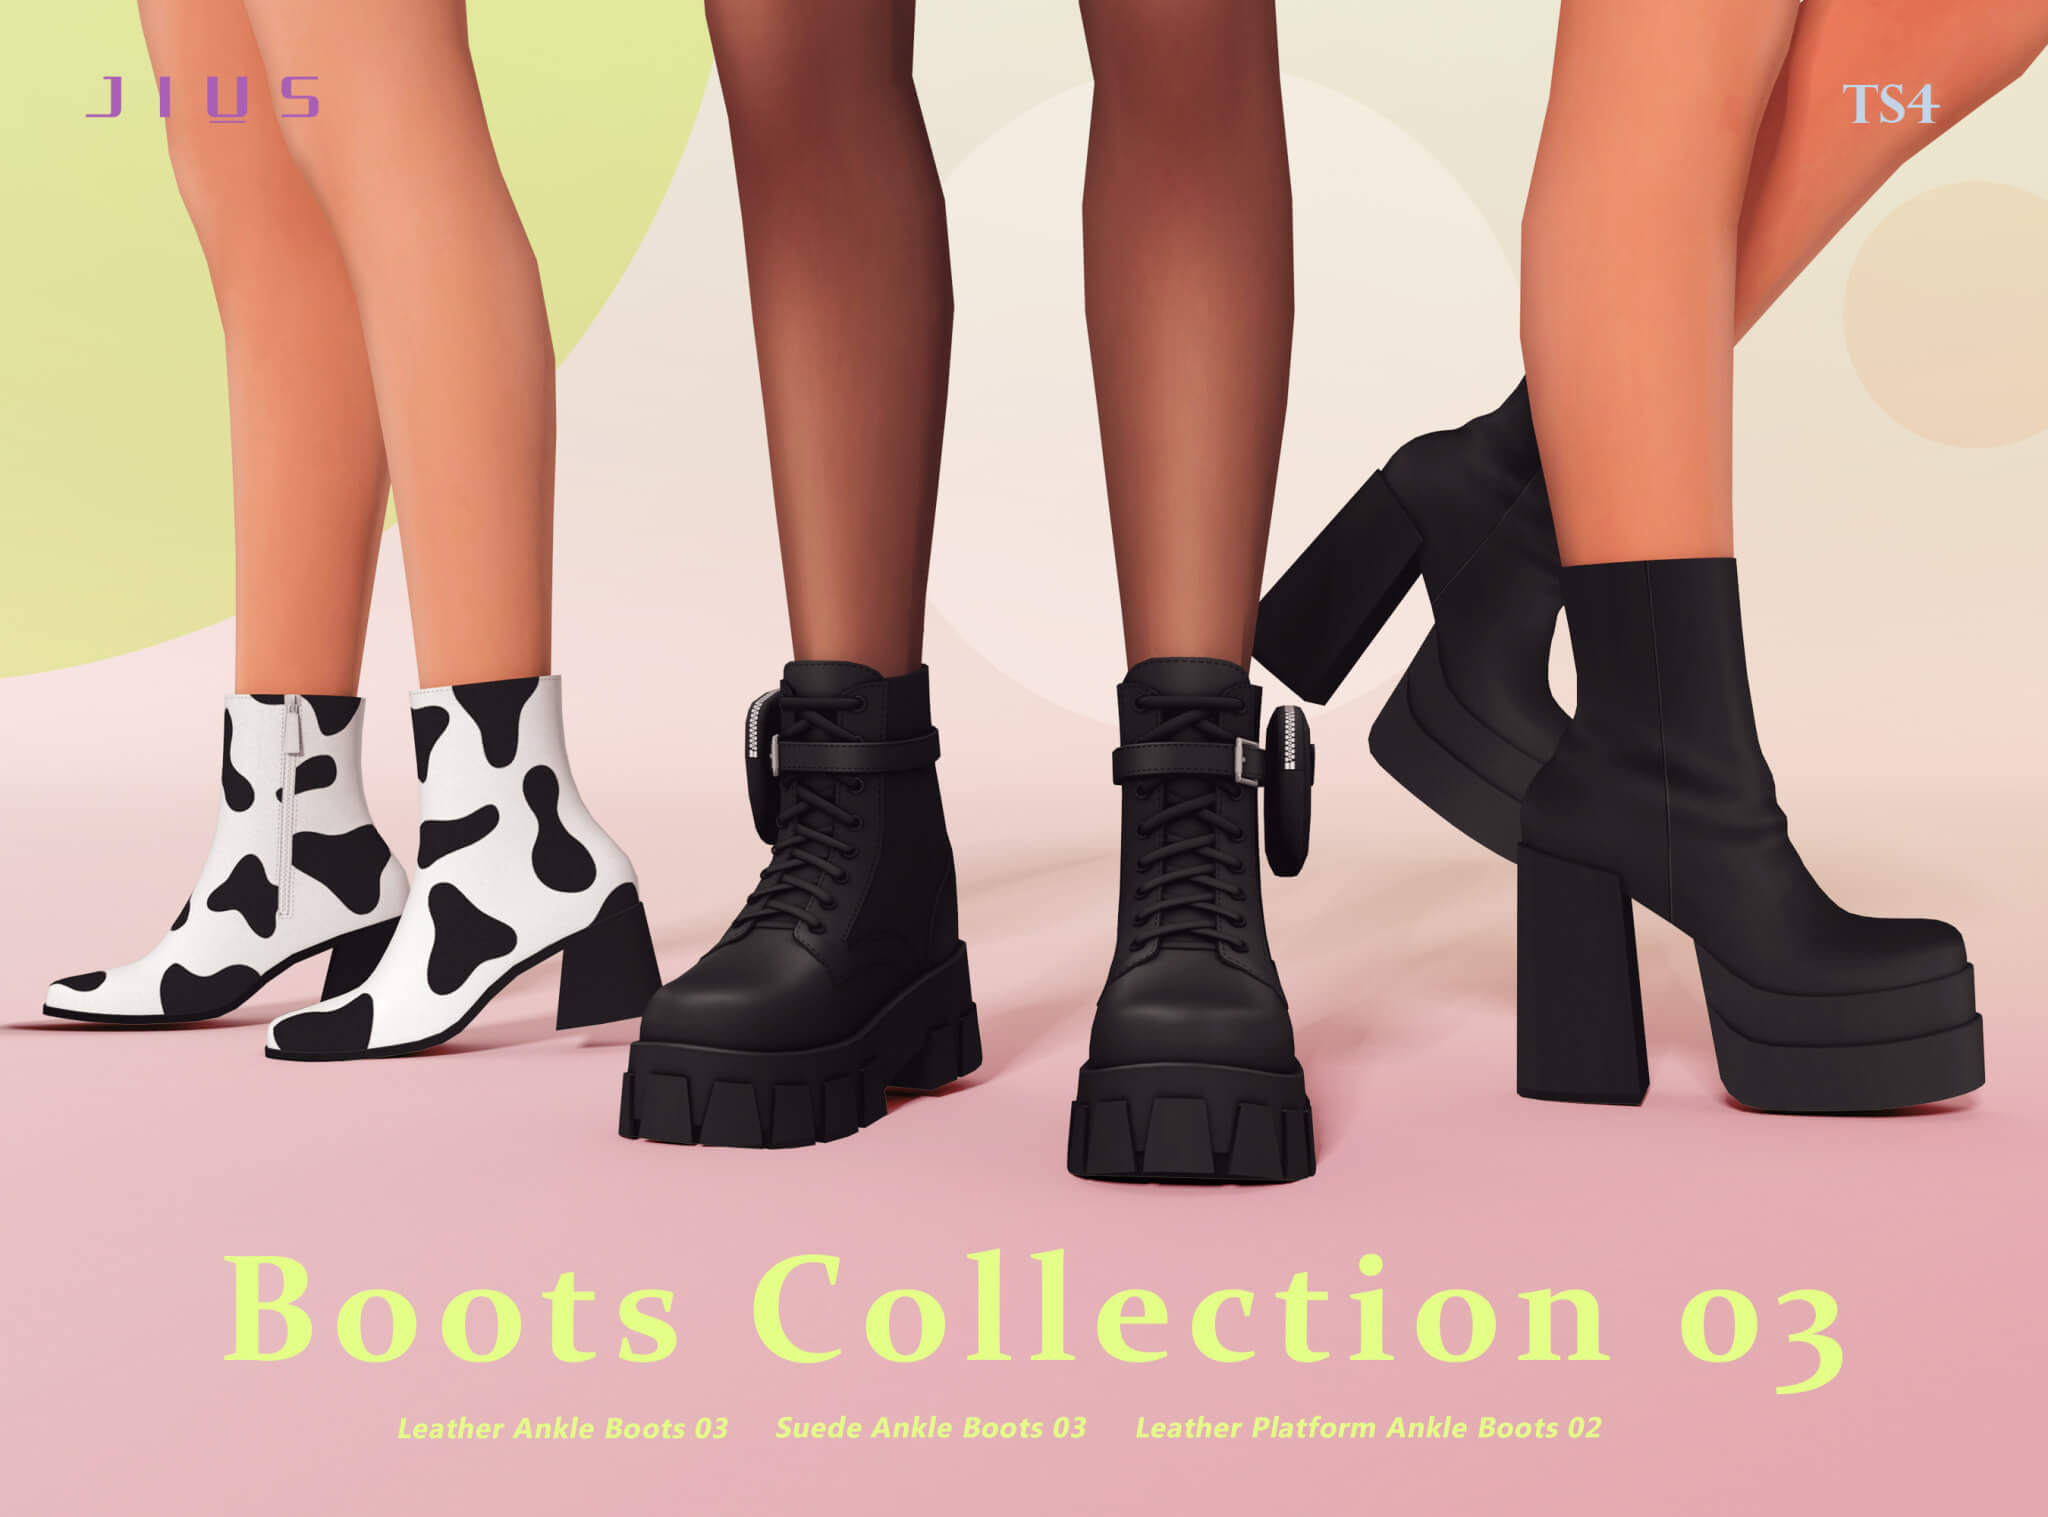 Boots Collection 03 Jius Le The Sims Book